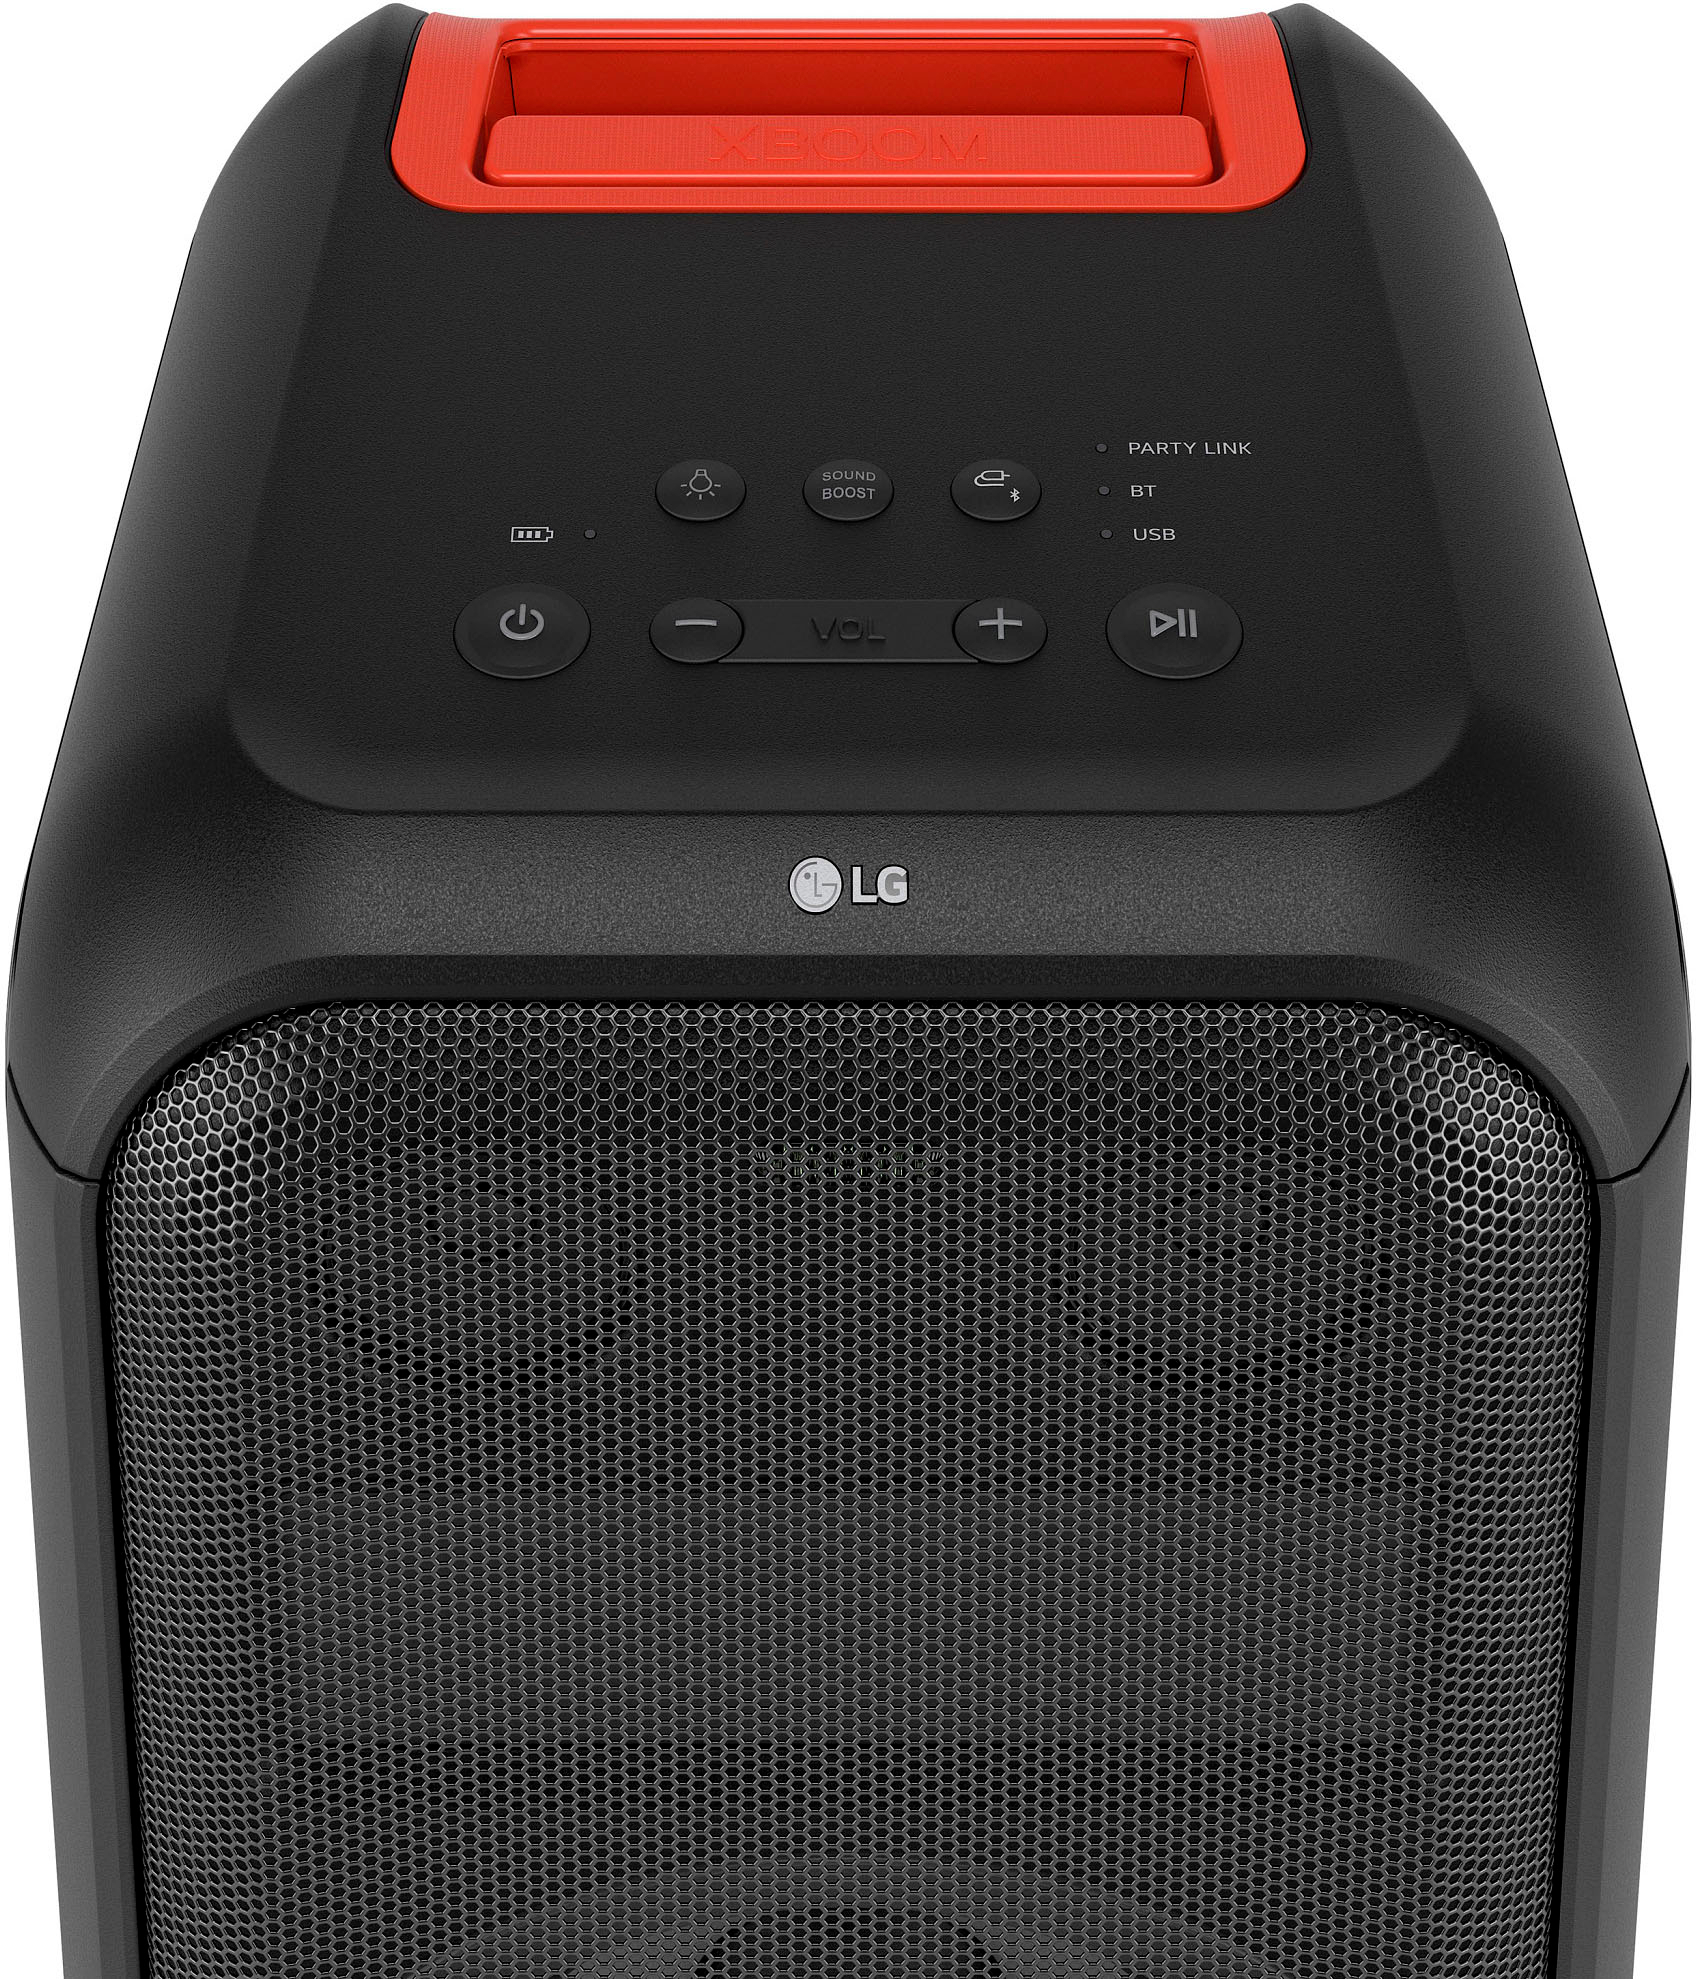 LG XBOOM XL7 Portable Pixel LED Buy Black XL7S - Tower Party with Best Speaker